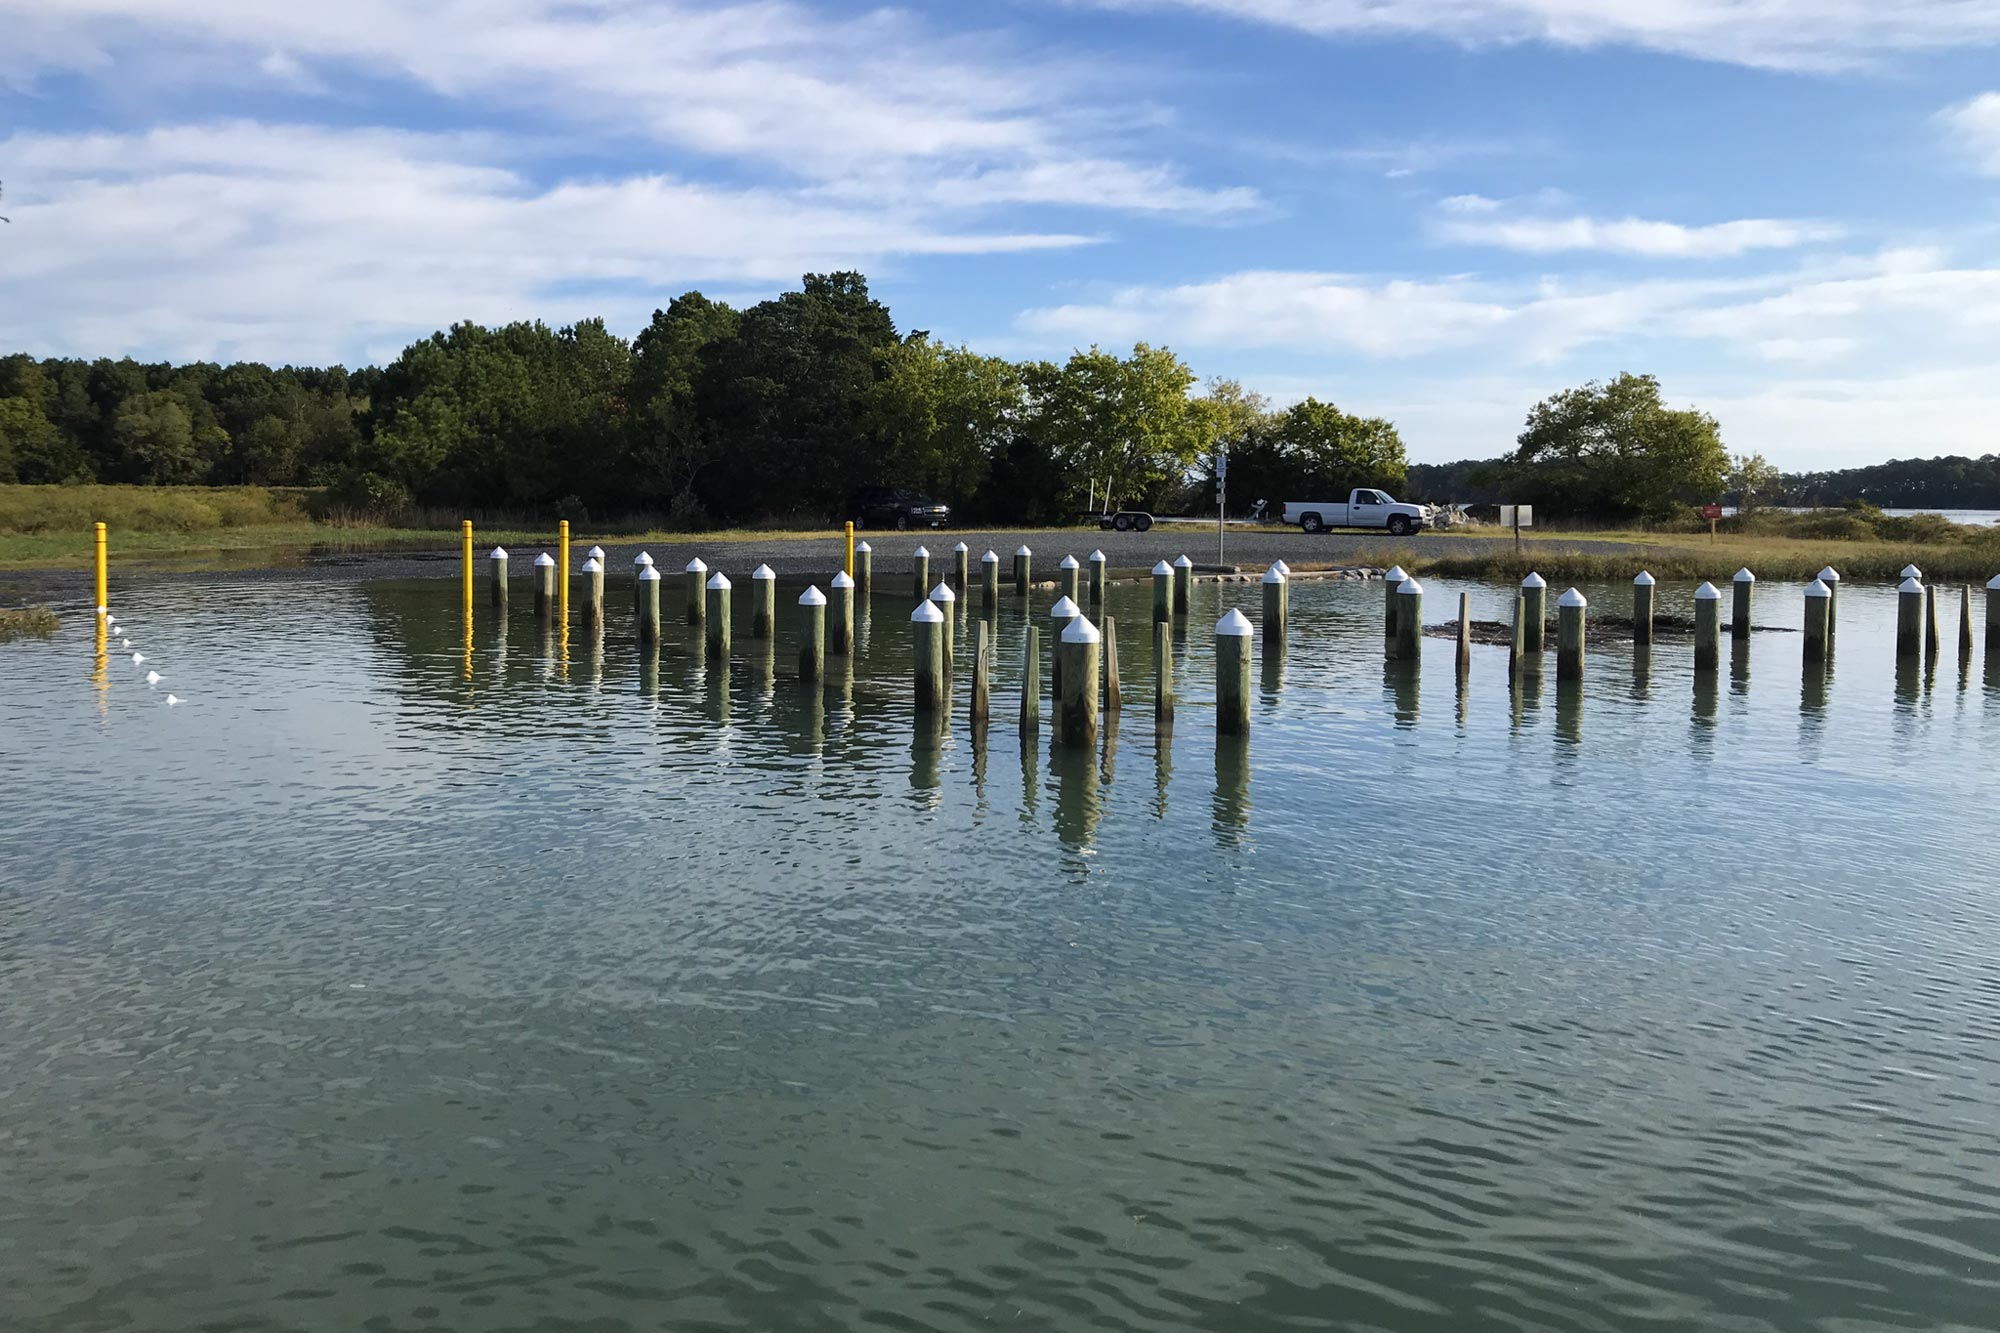 Flooded boat ramp with the pier posts sticking up